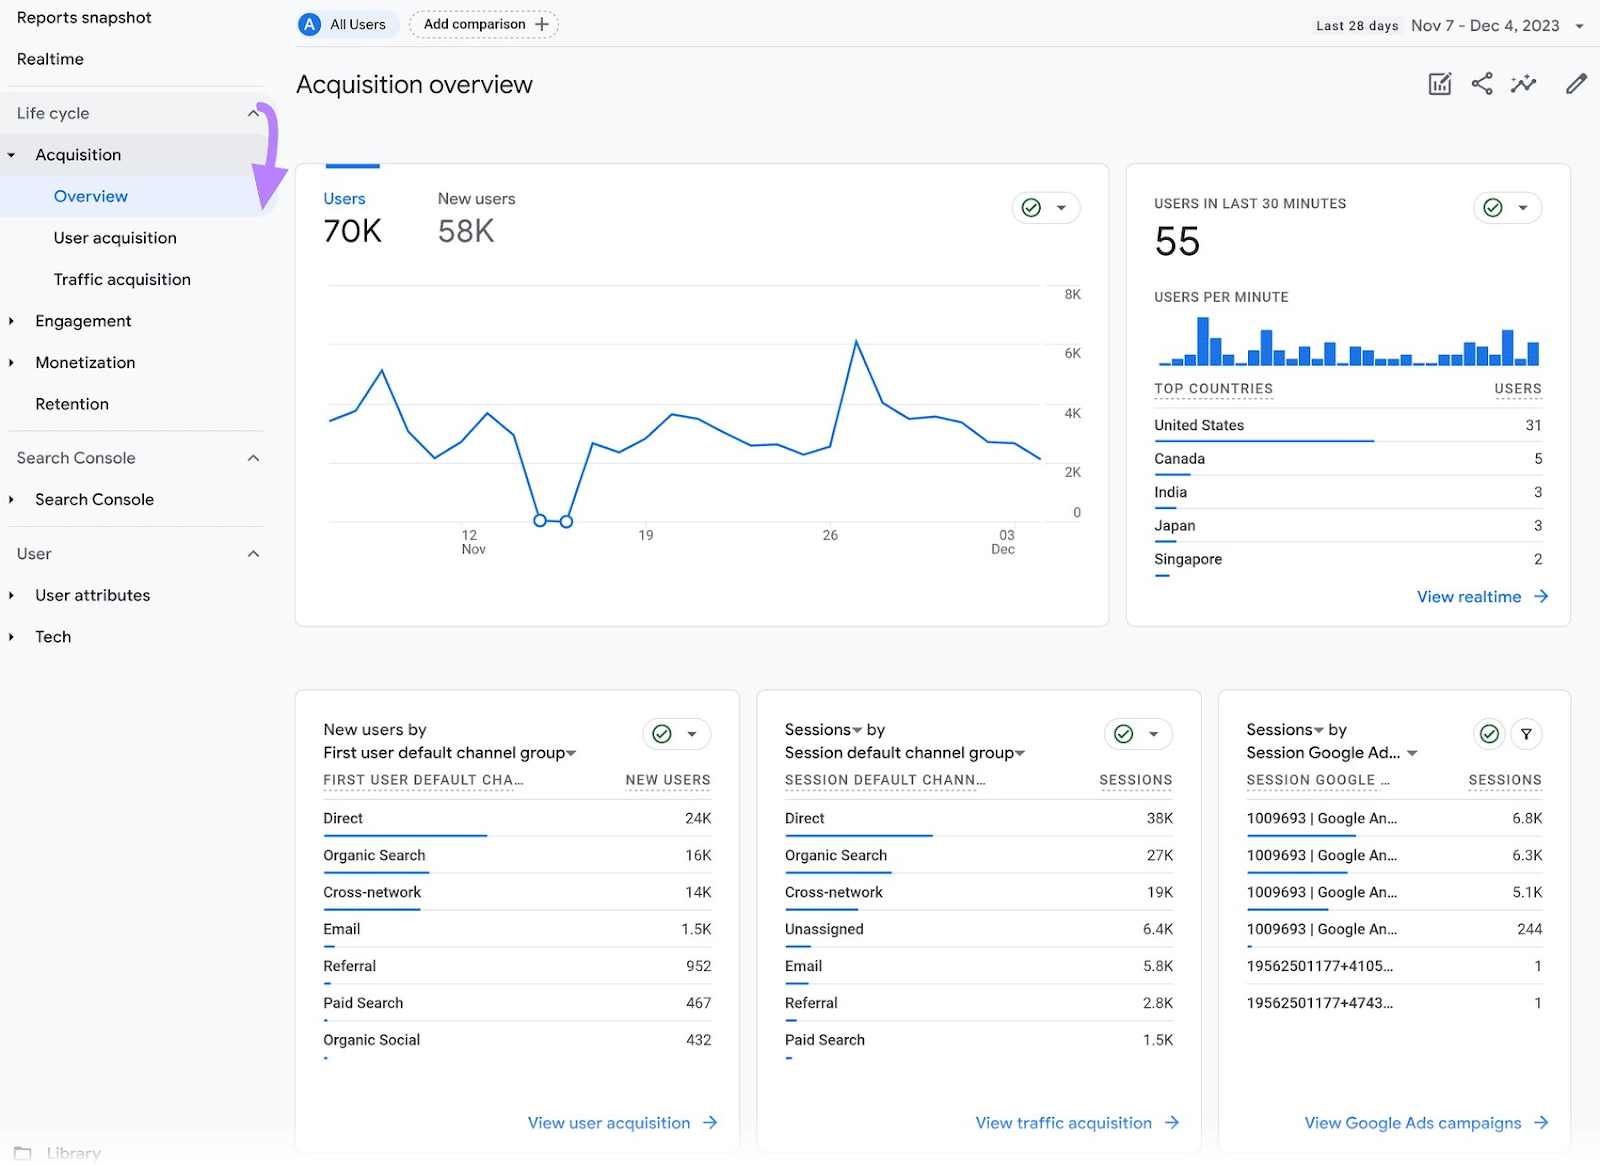 Acquisition overview dashboard